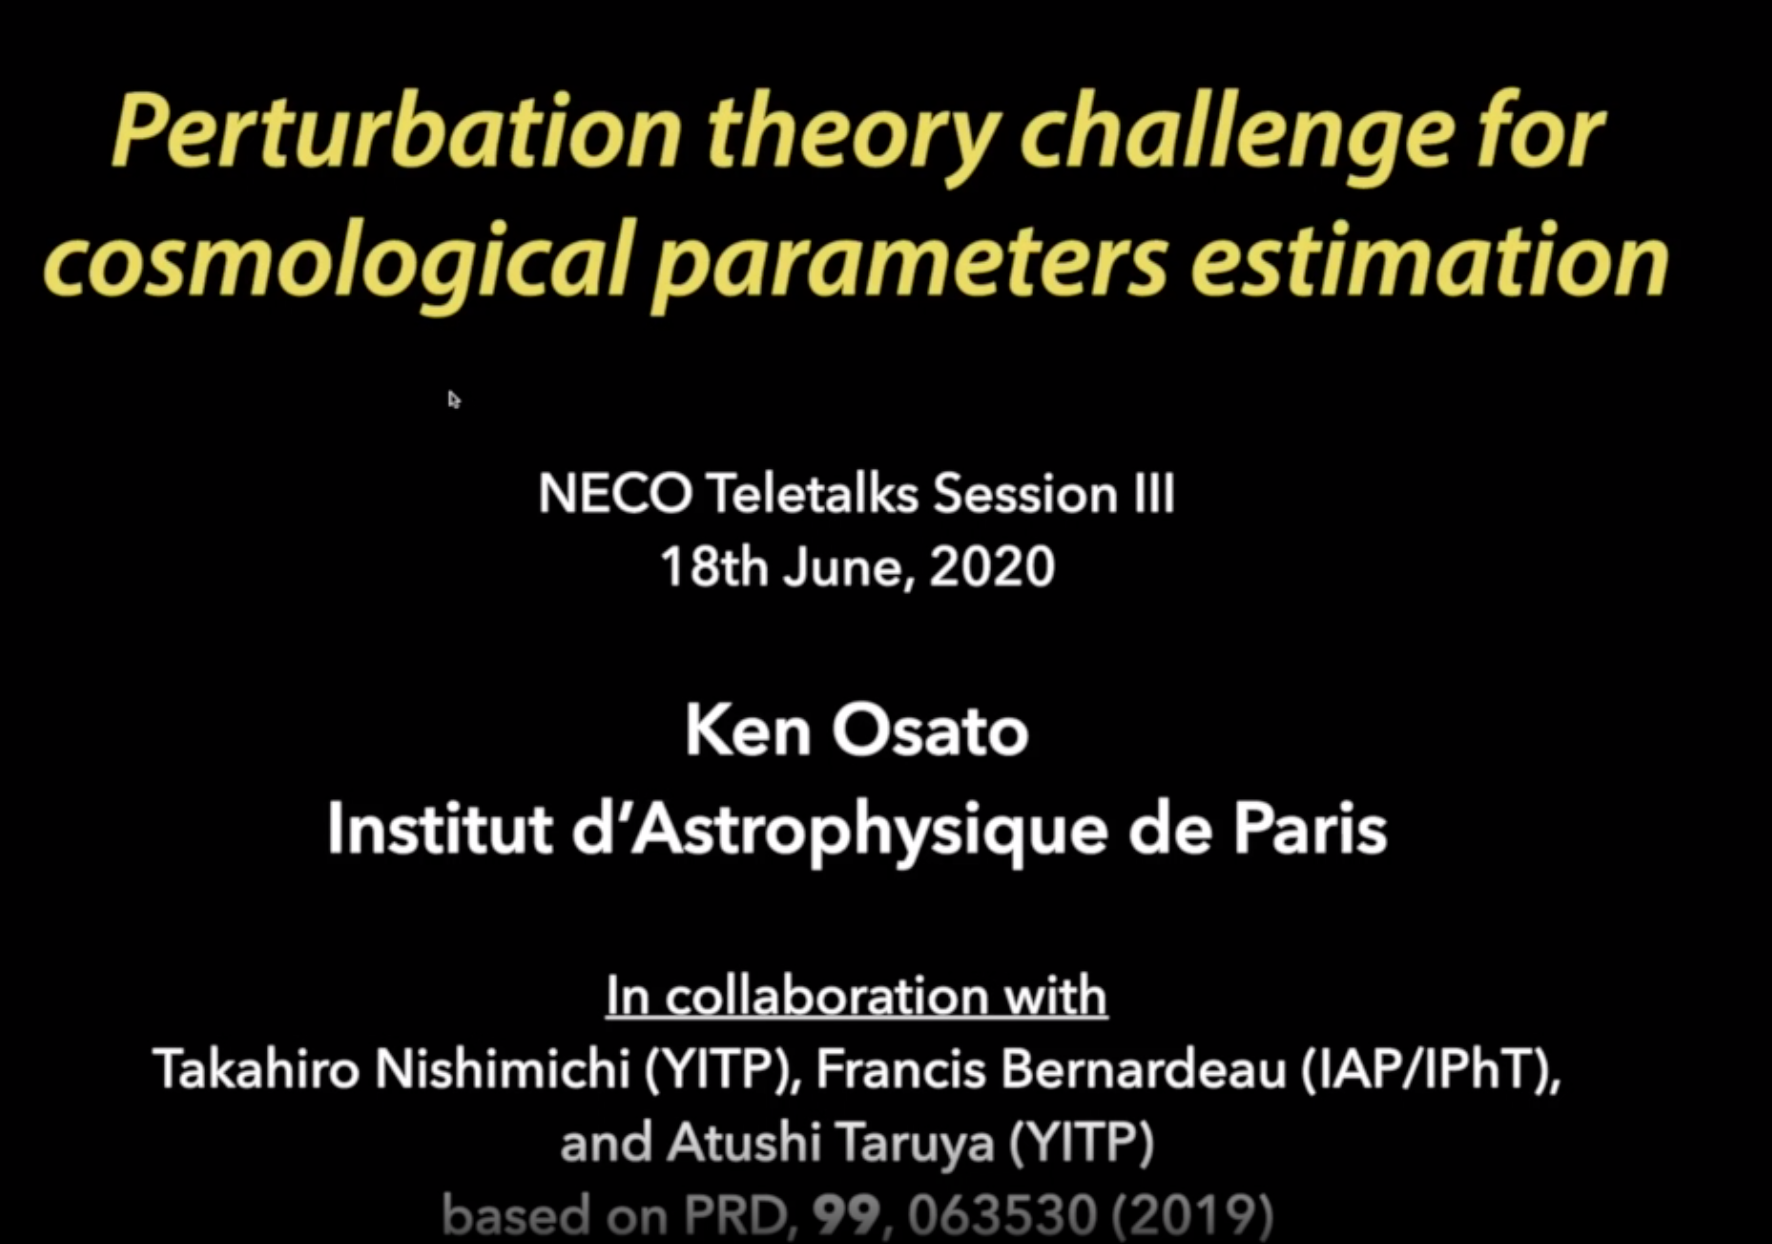 Perturbation Theory for Cosmology